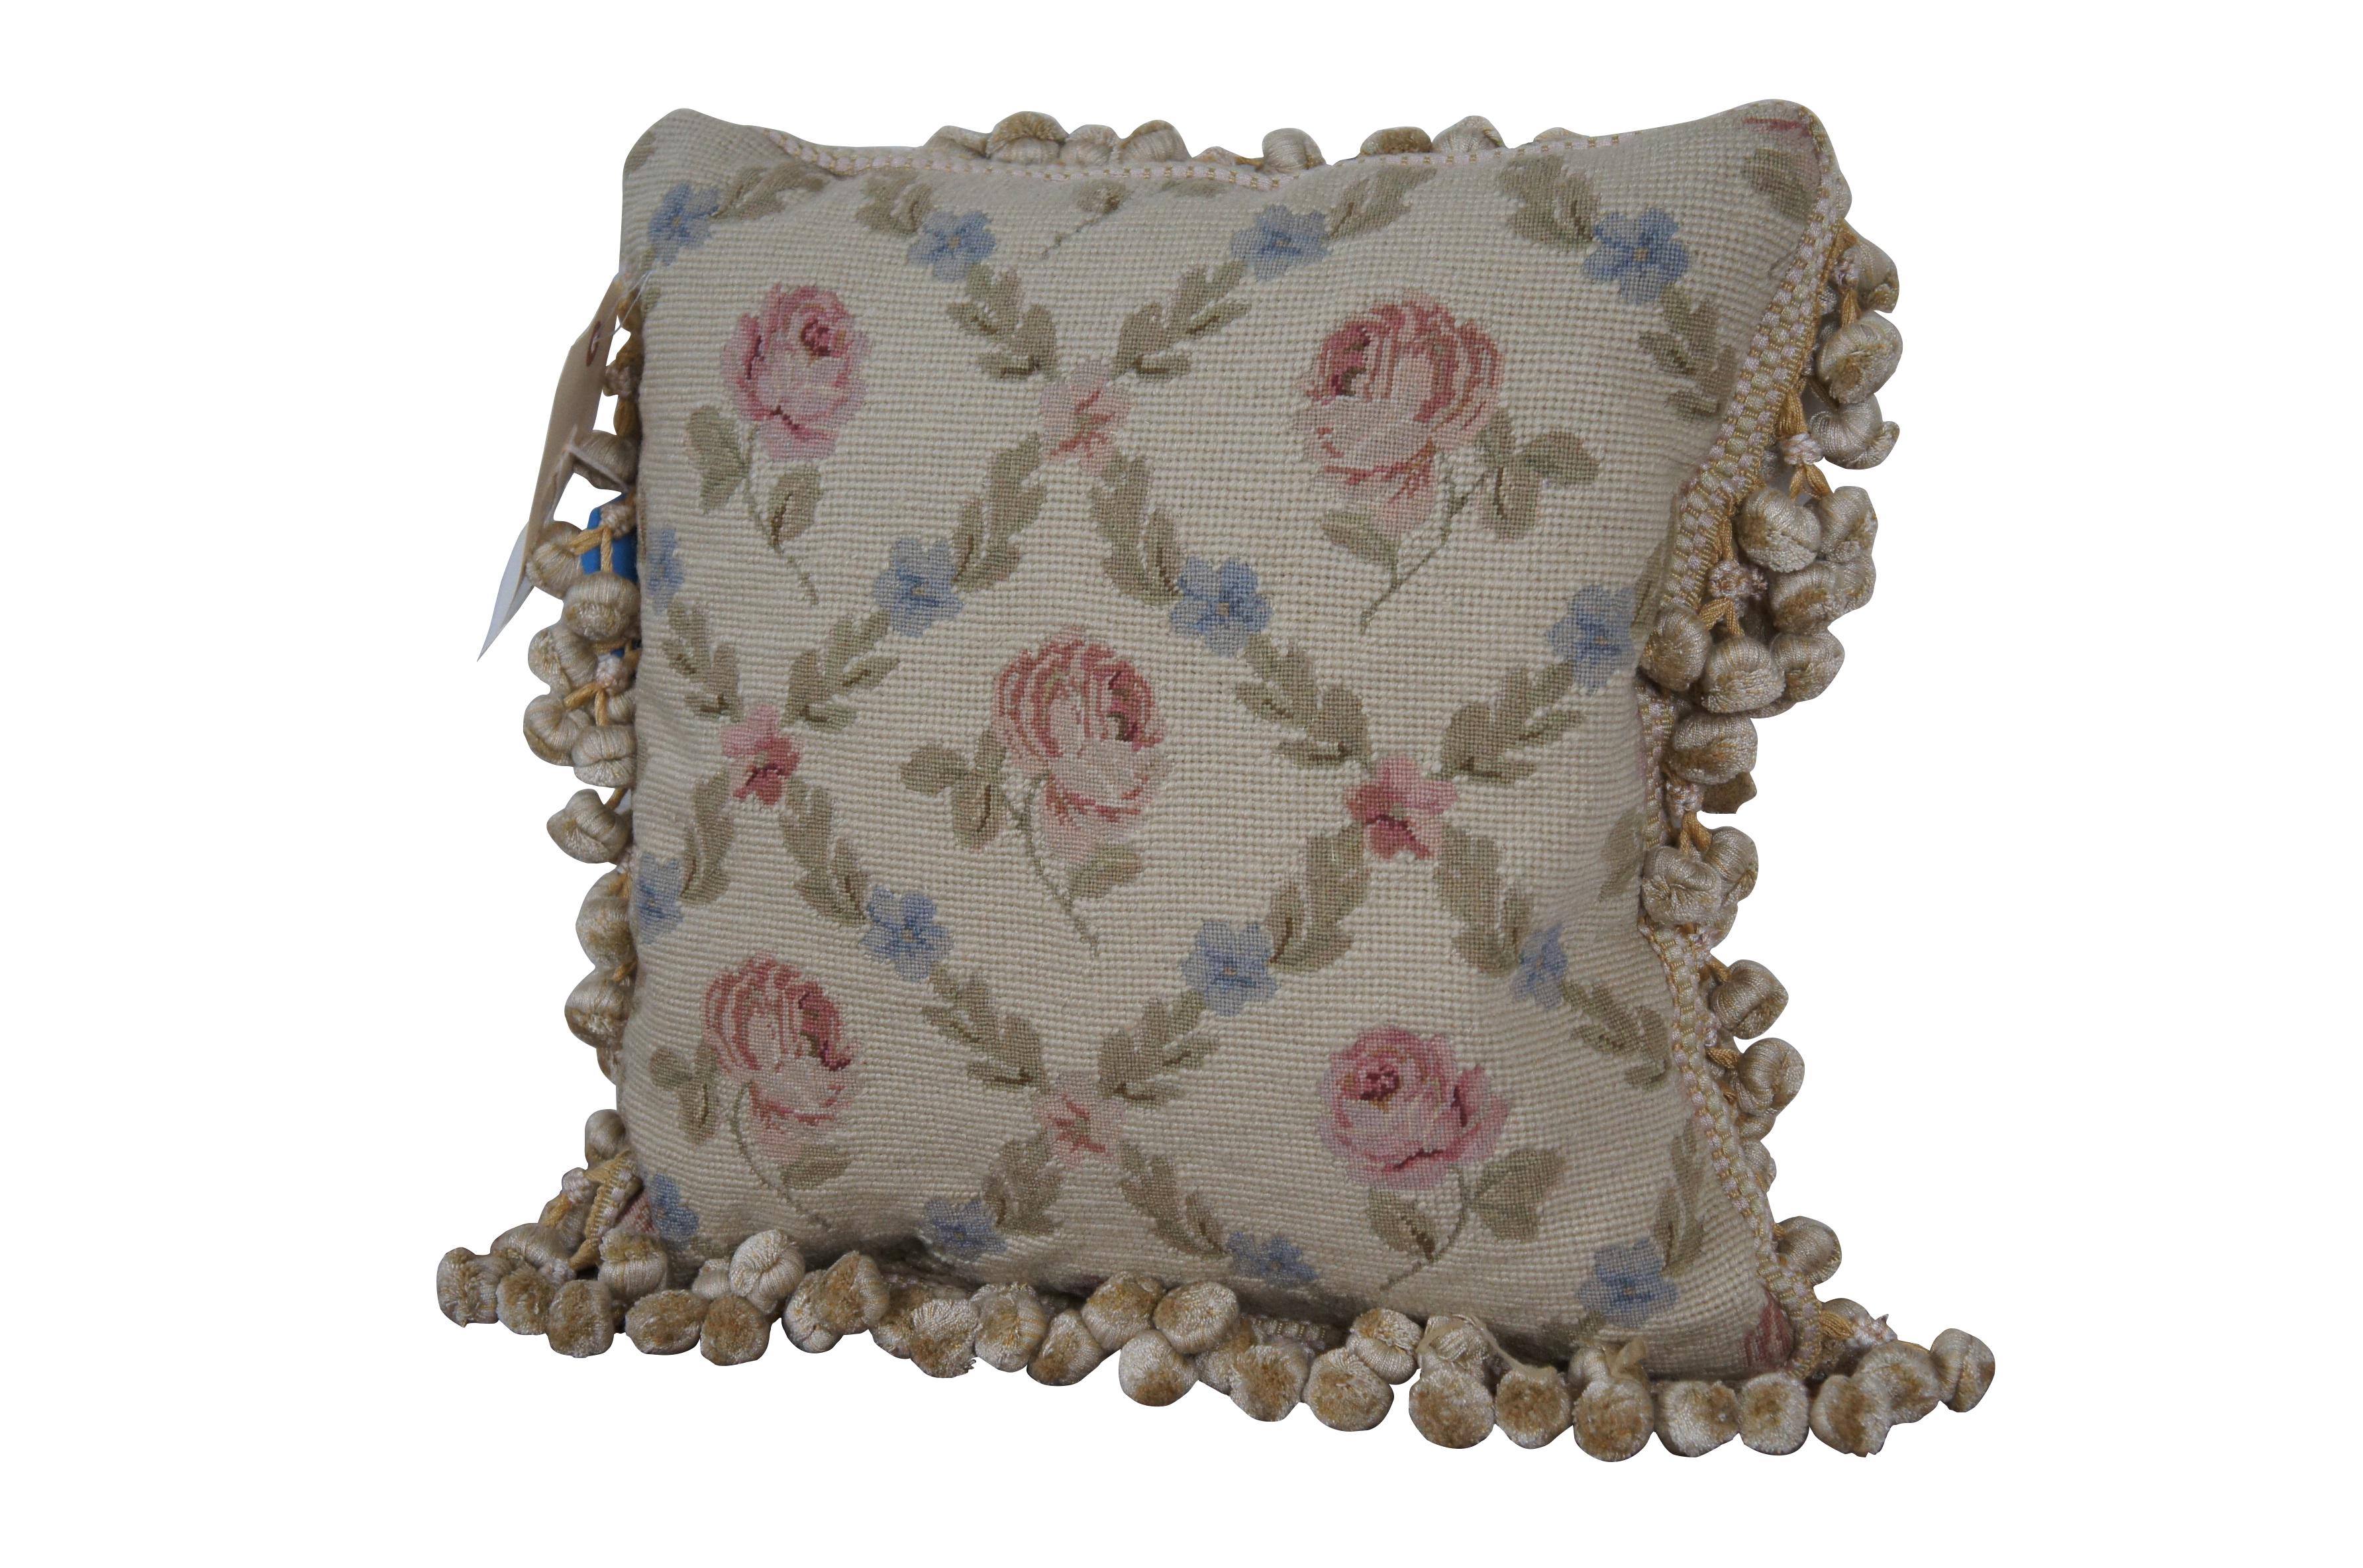 20th century square needlepoint throw pillow, hand embroidered with a pattern of pink roses, divided by criss crossing lines of pink and blue flowers and leaves, on a slightly yellow beige background. Cream and gold ball tassel trim. Cream velour